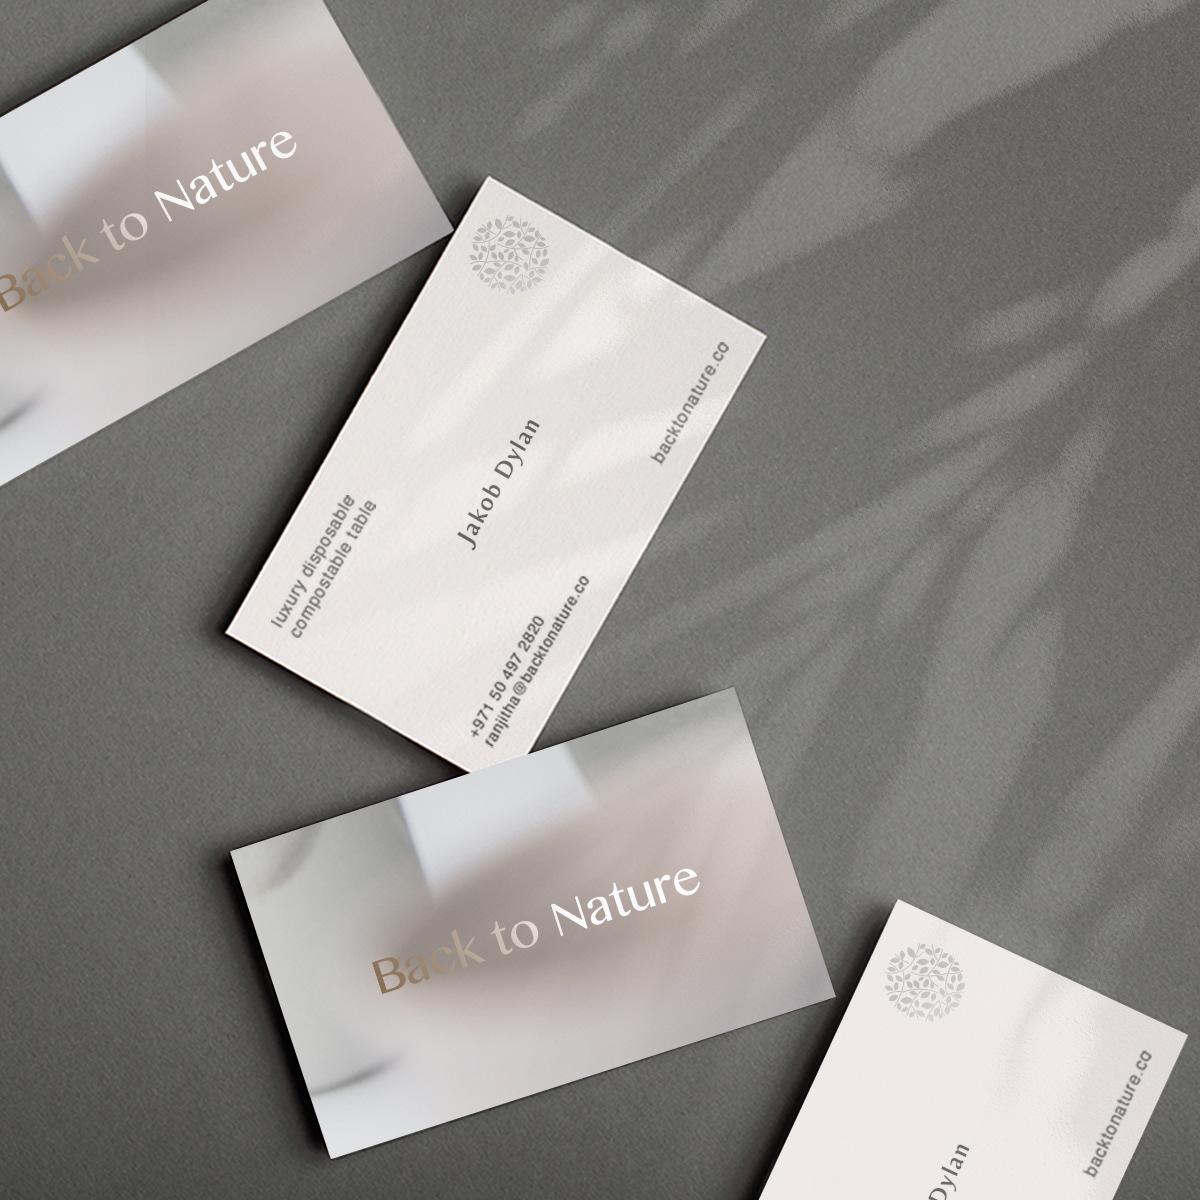 Stationery design for back to nature